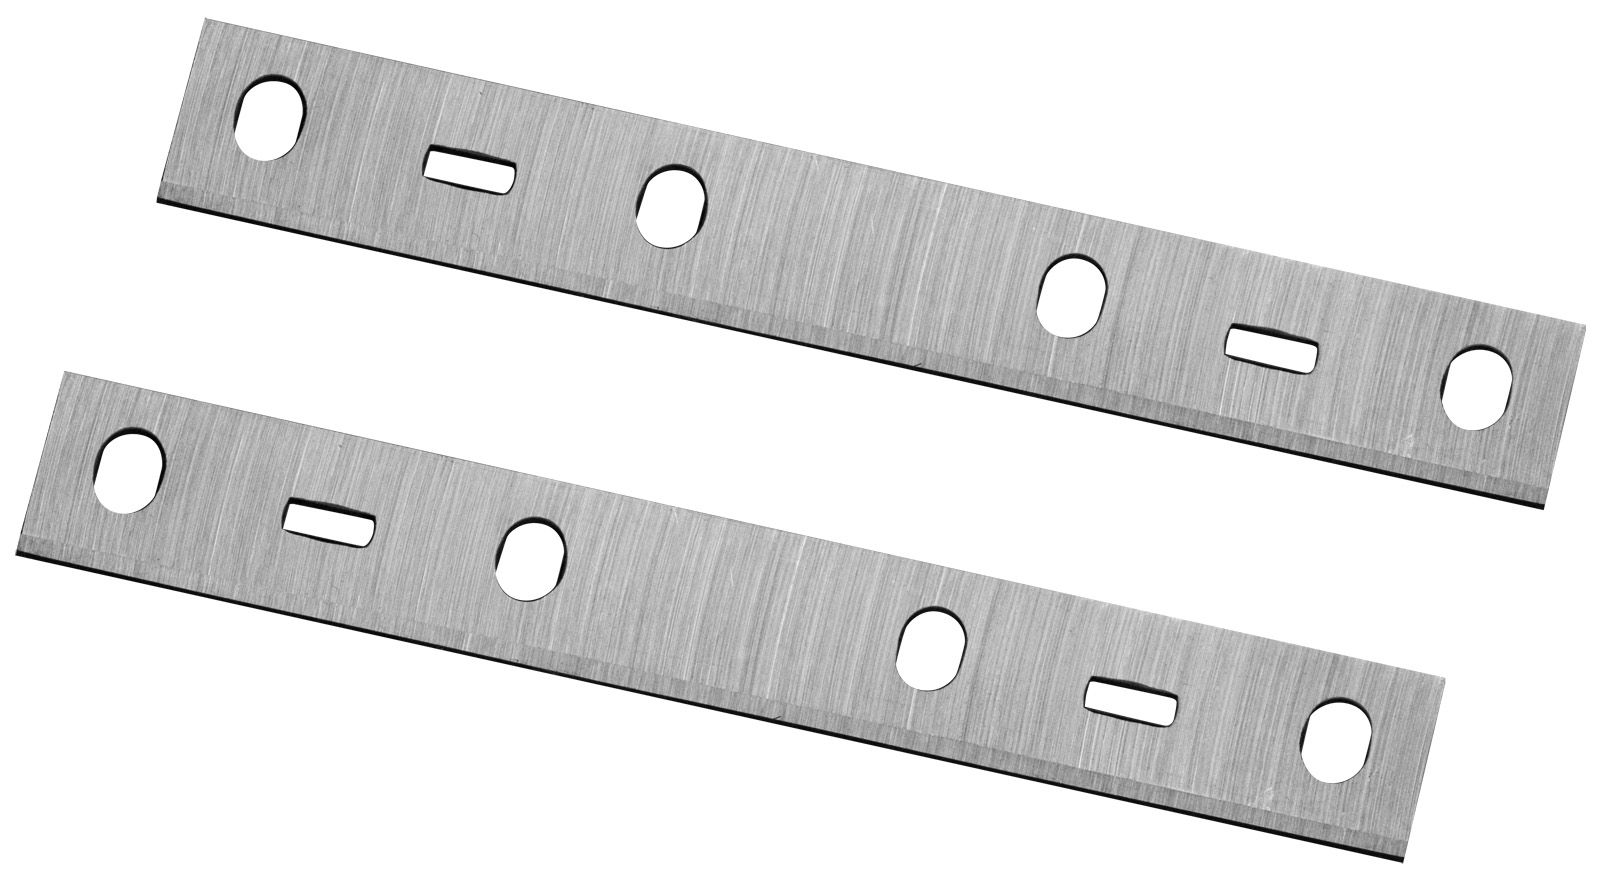 Powertec 148012 6-Inch Jointer Knives for Craftsman 21788, HSS, Set of 2